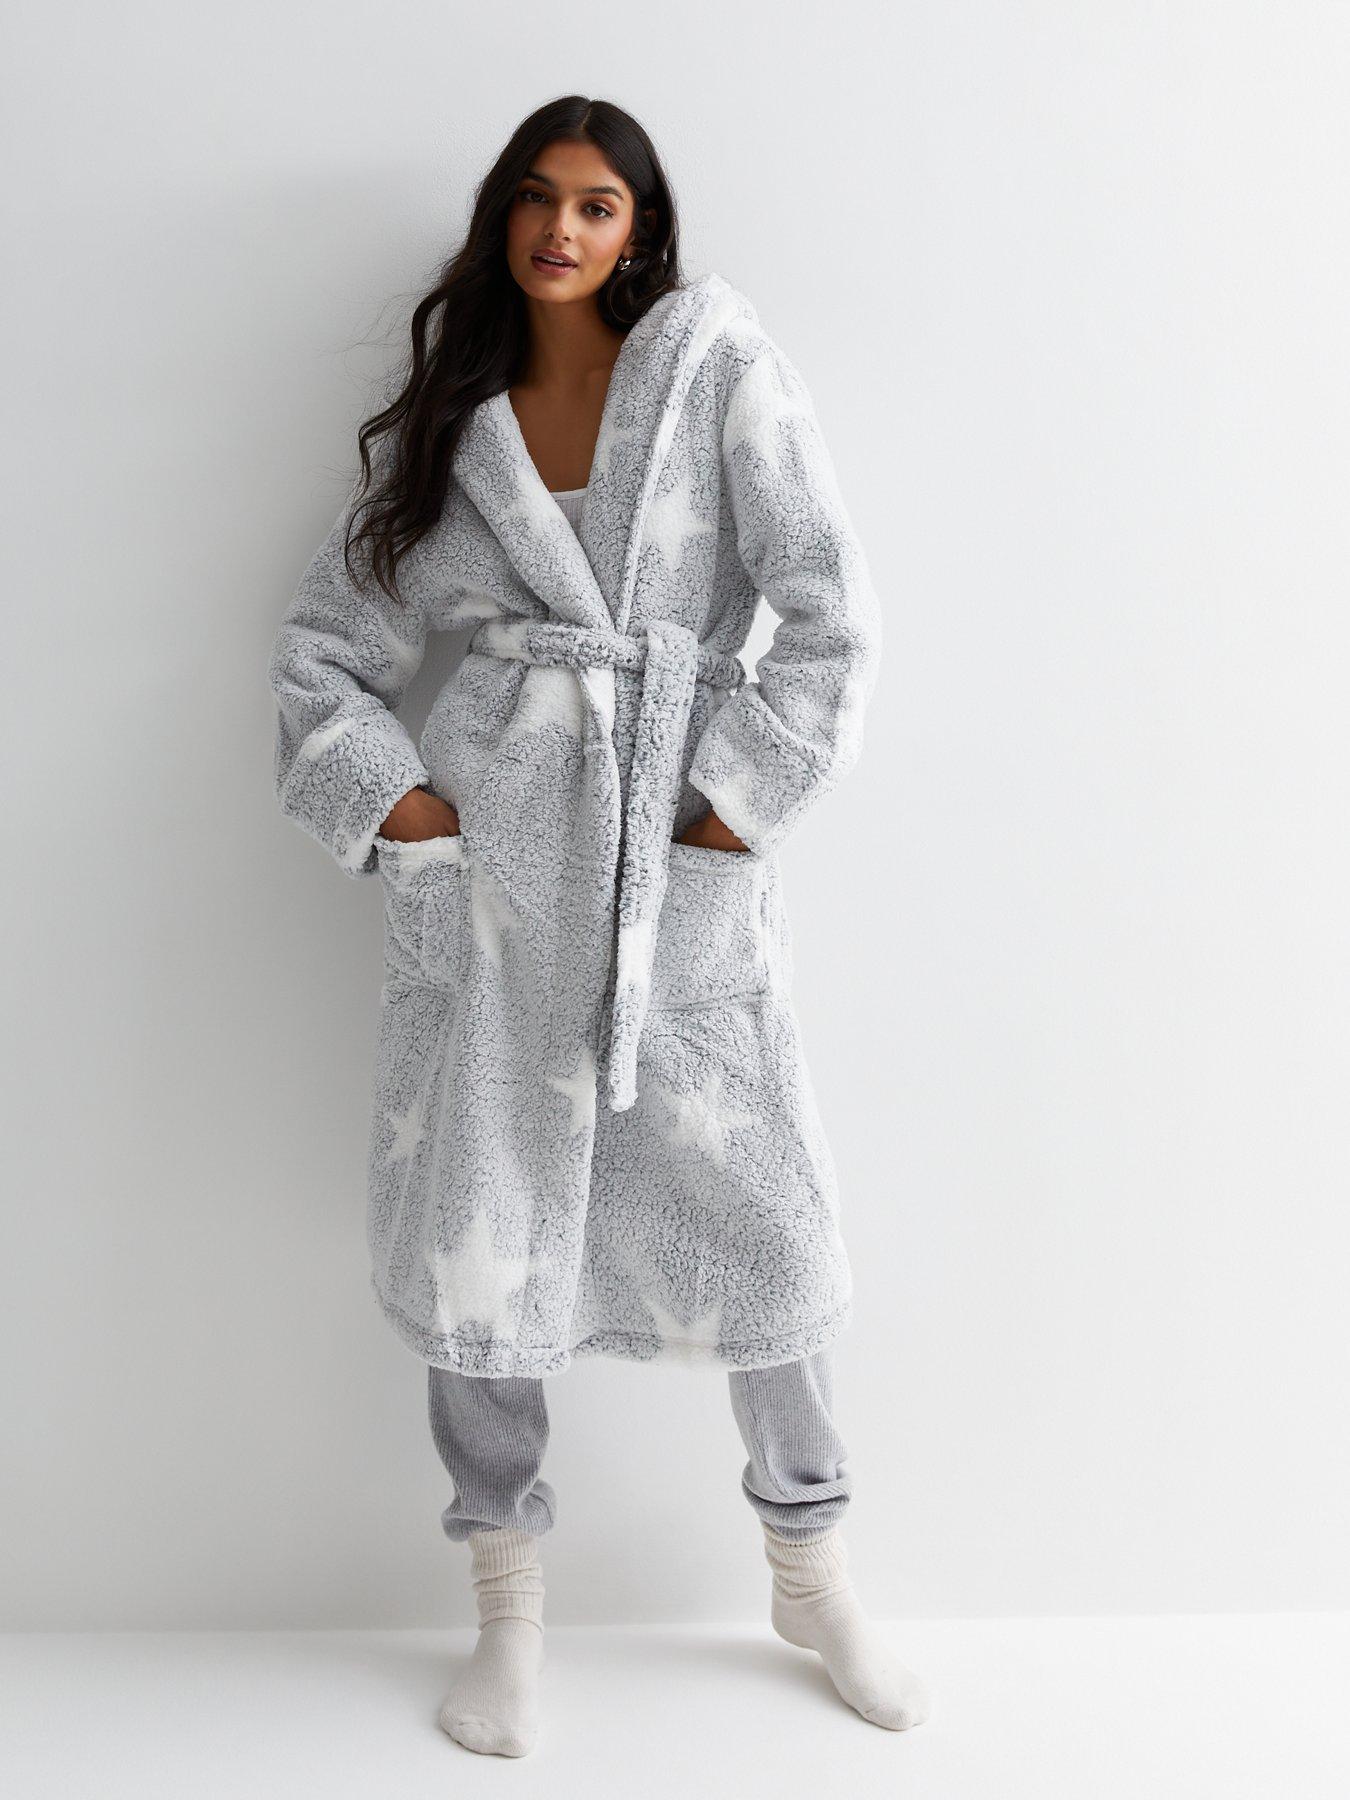 Homgro Women's House Fuzzy Hooodie Robe Winter Housecoat Soft Flannel Warm  Loose Fit Bathrobe Khaki Large at  Women's Clothing store